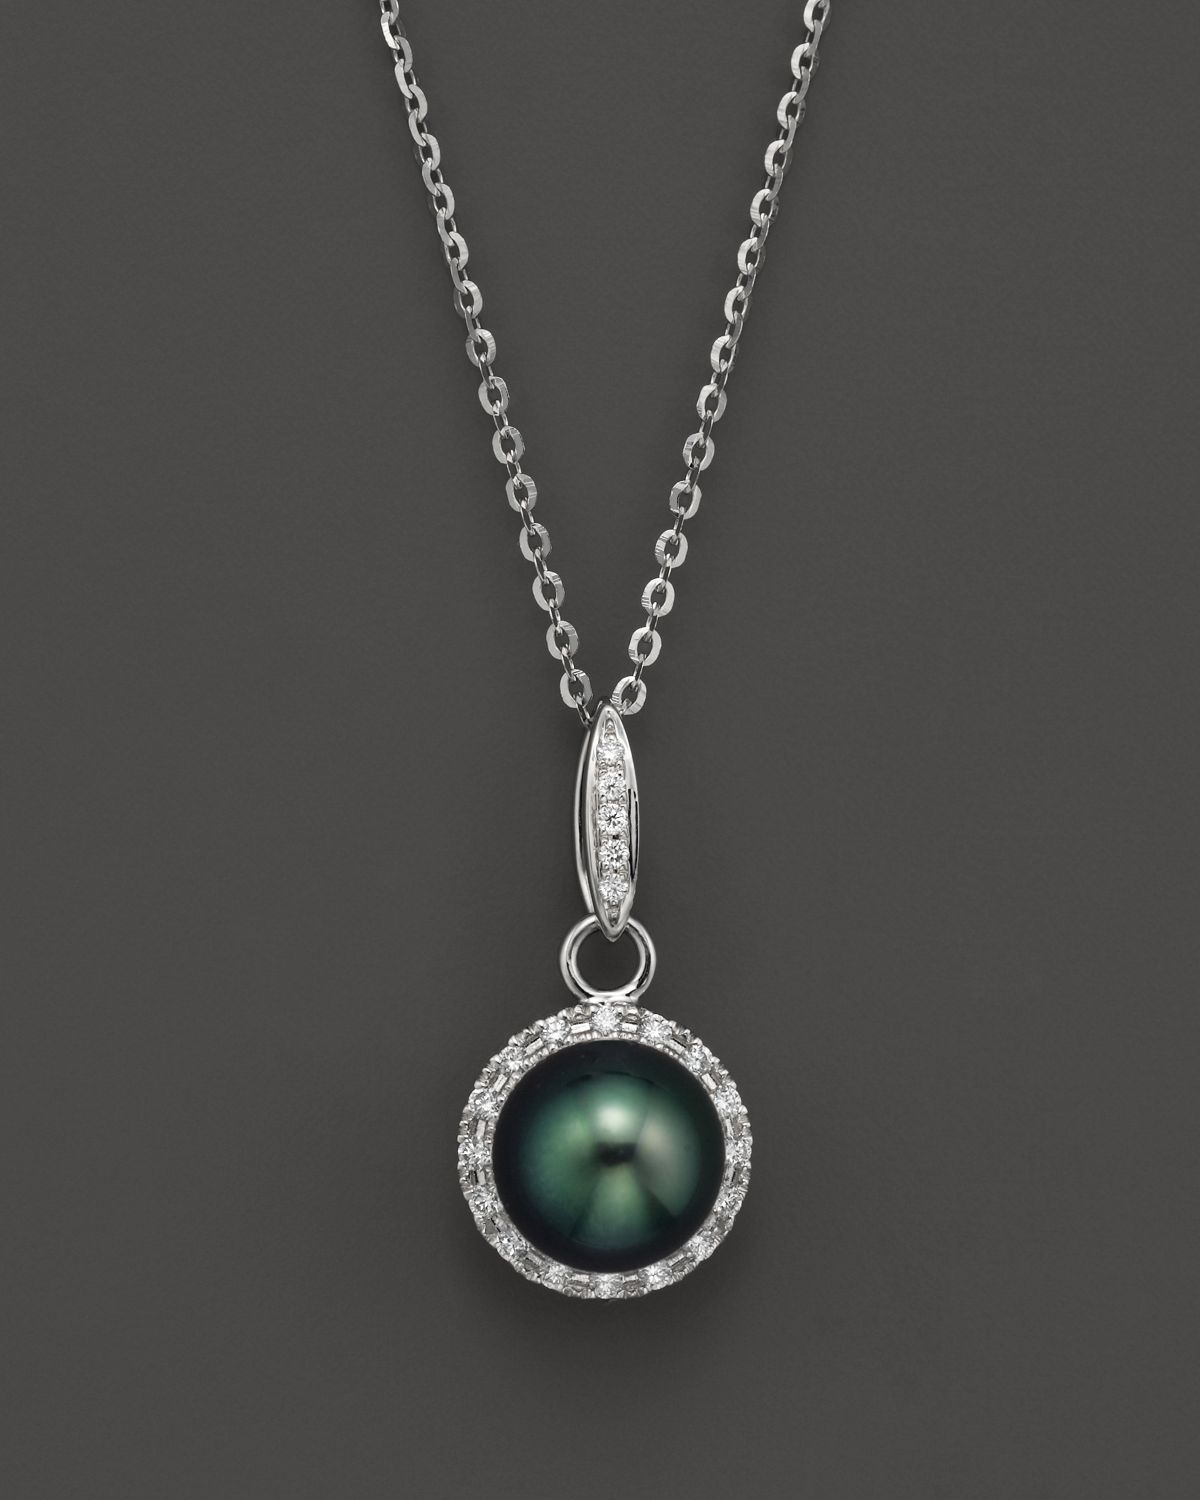 Tara pearls Tahitian Cultured Pearl Pendant Necklace With ...